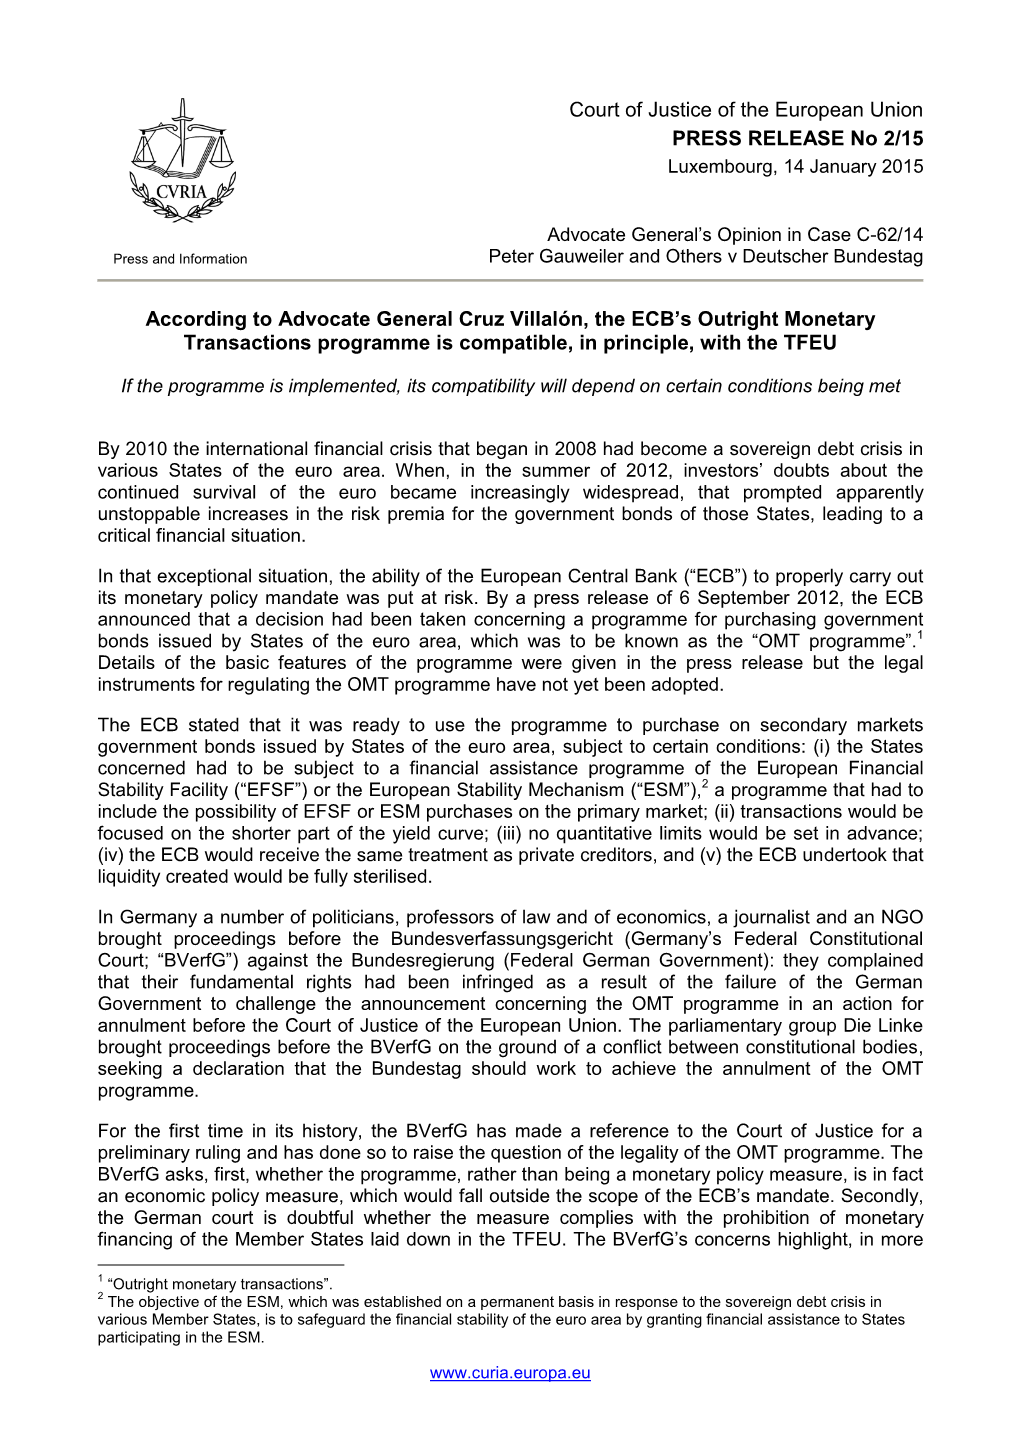 Court of Justice of the European Union PRESS RELEASE No 2/15 Luxembourg, 14 January 2015